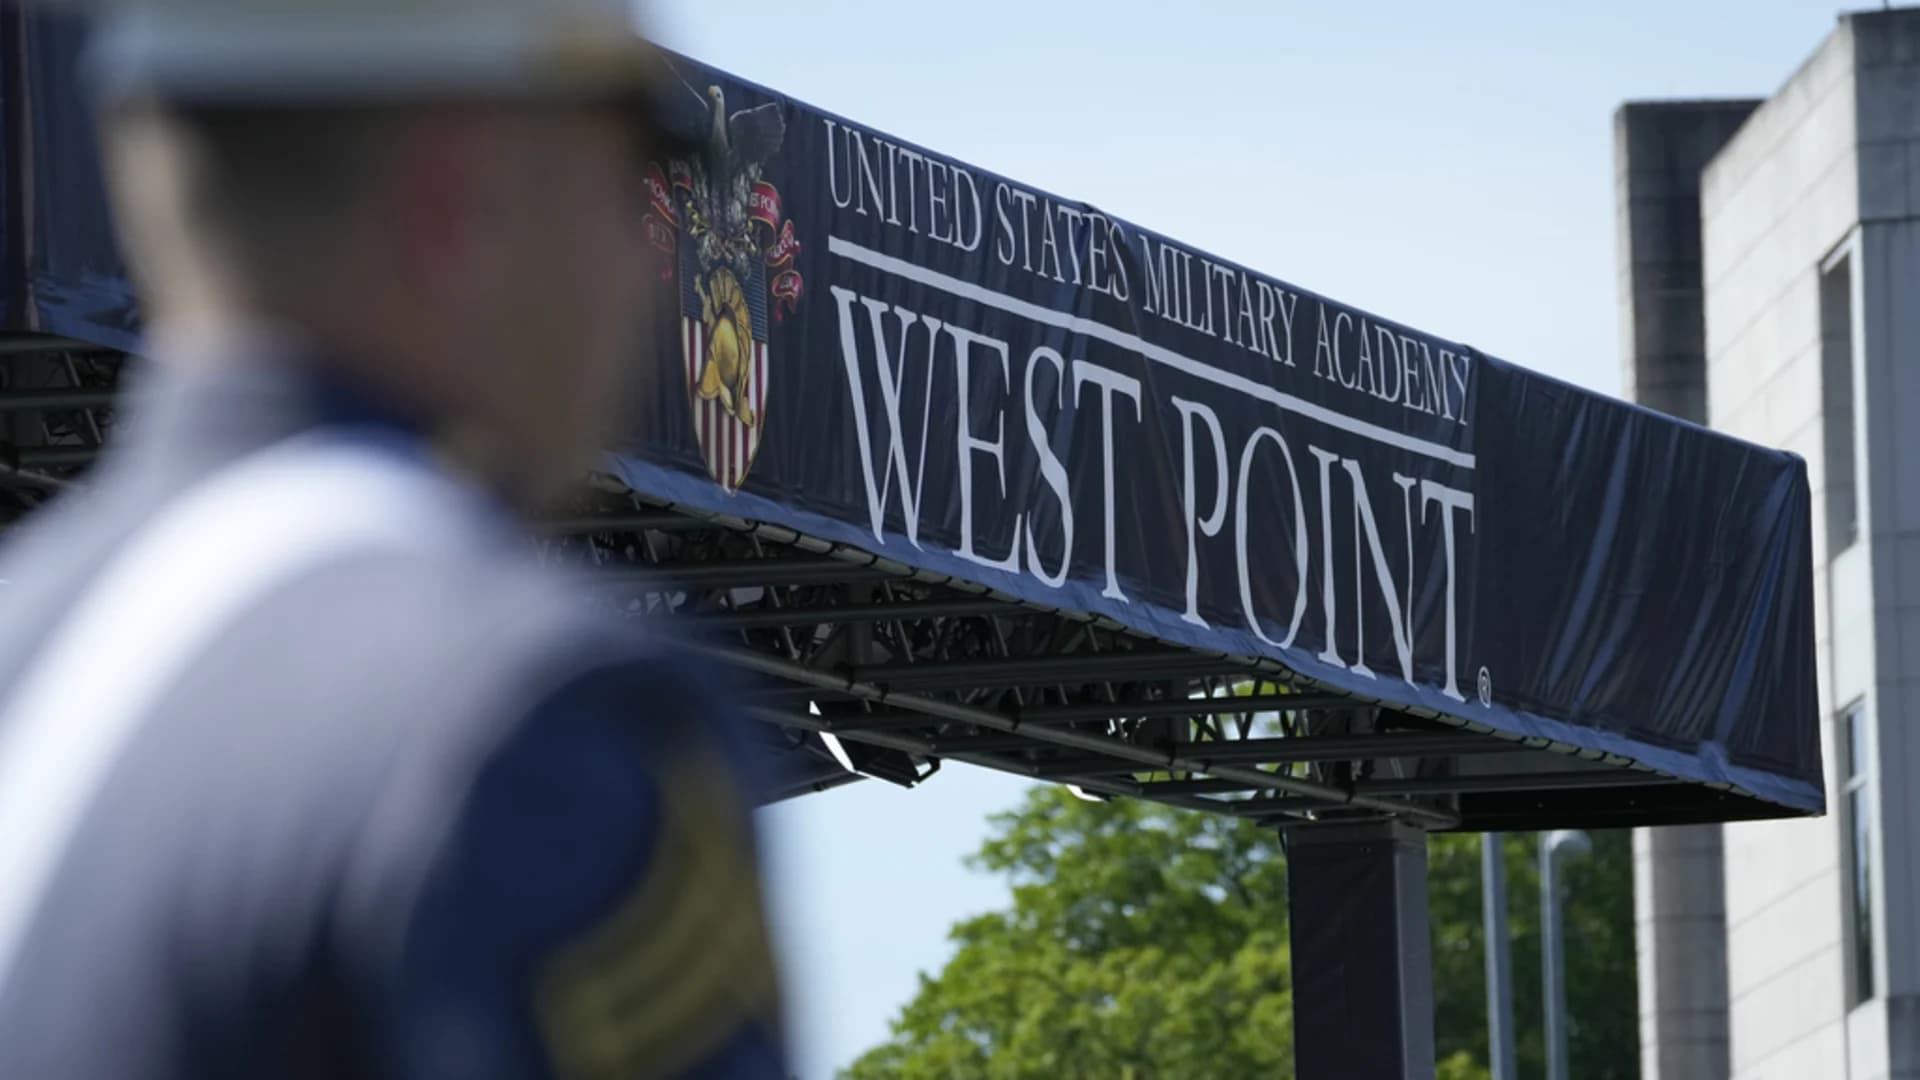 US Army Garrison West Point commander suspended amid investigation